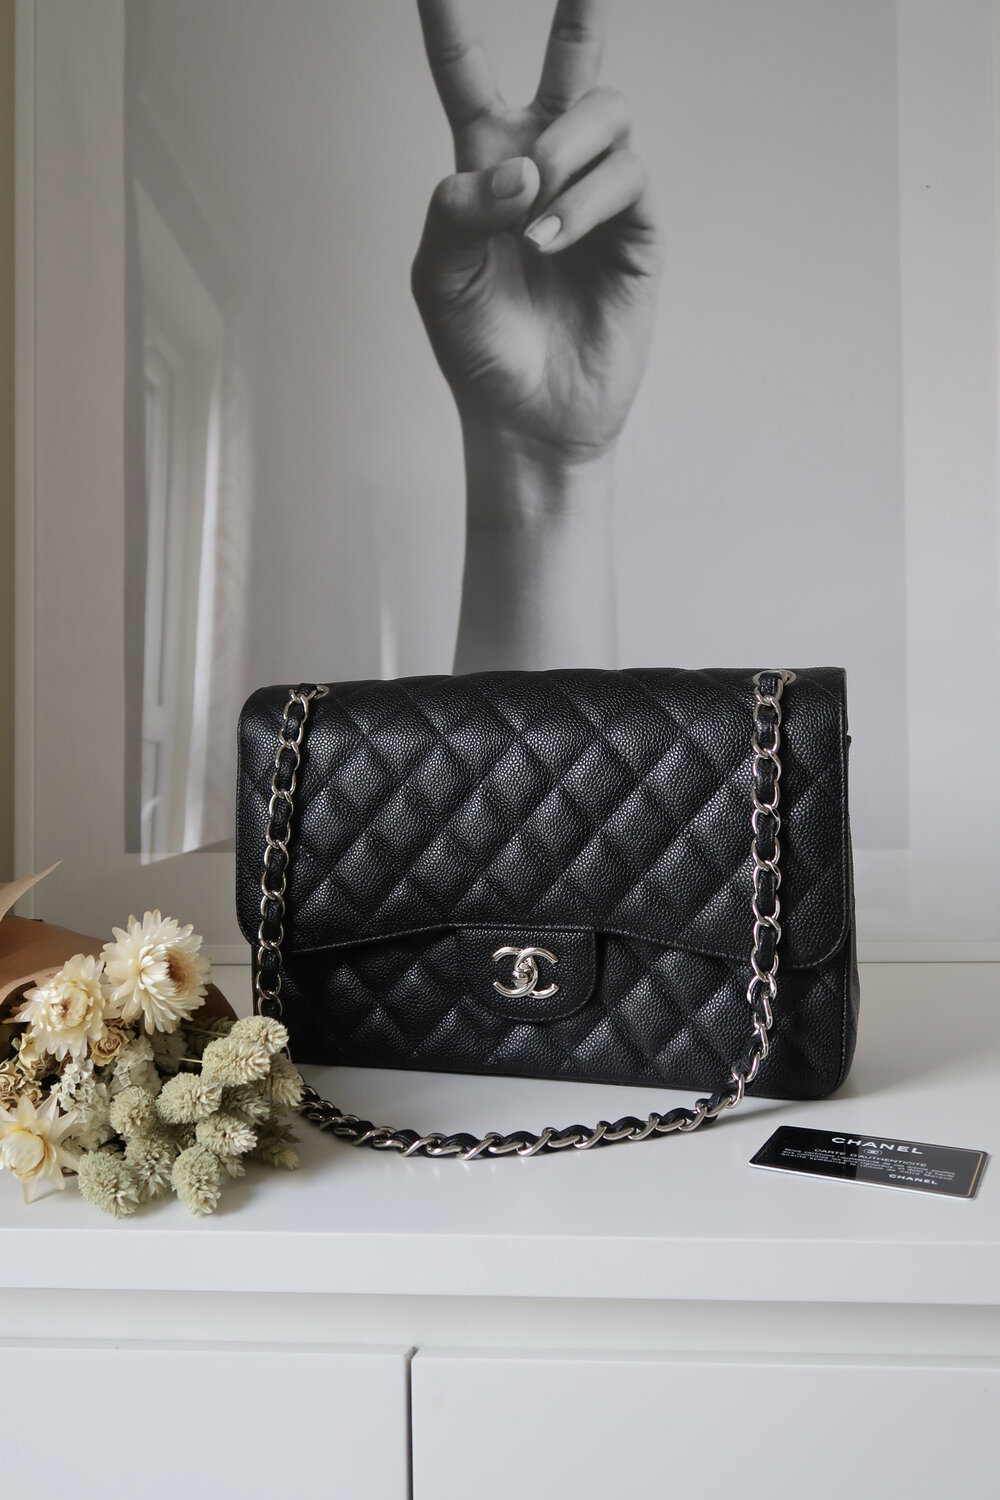 Chanel Large Black Caviar Classic Double Flap, 2015-2016 — Blaise Ruby Loves